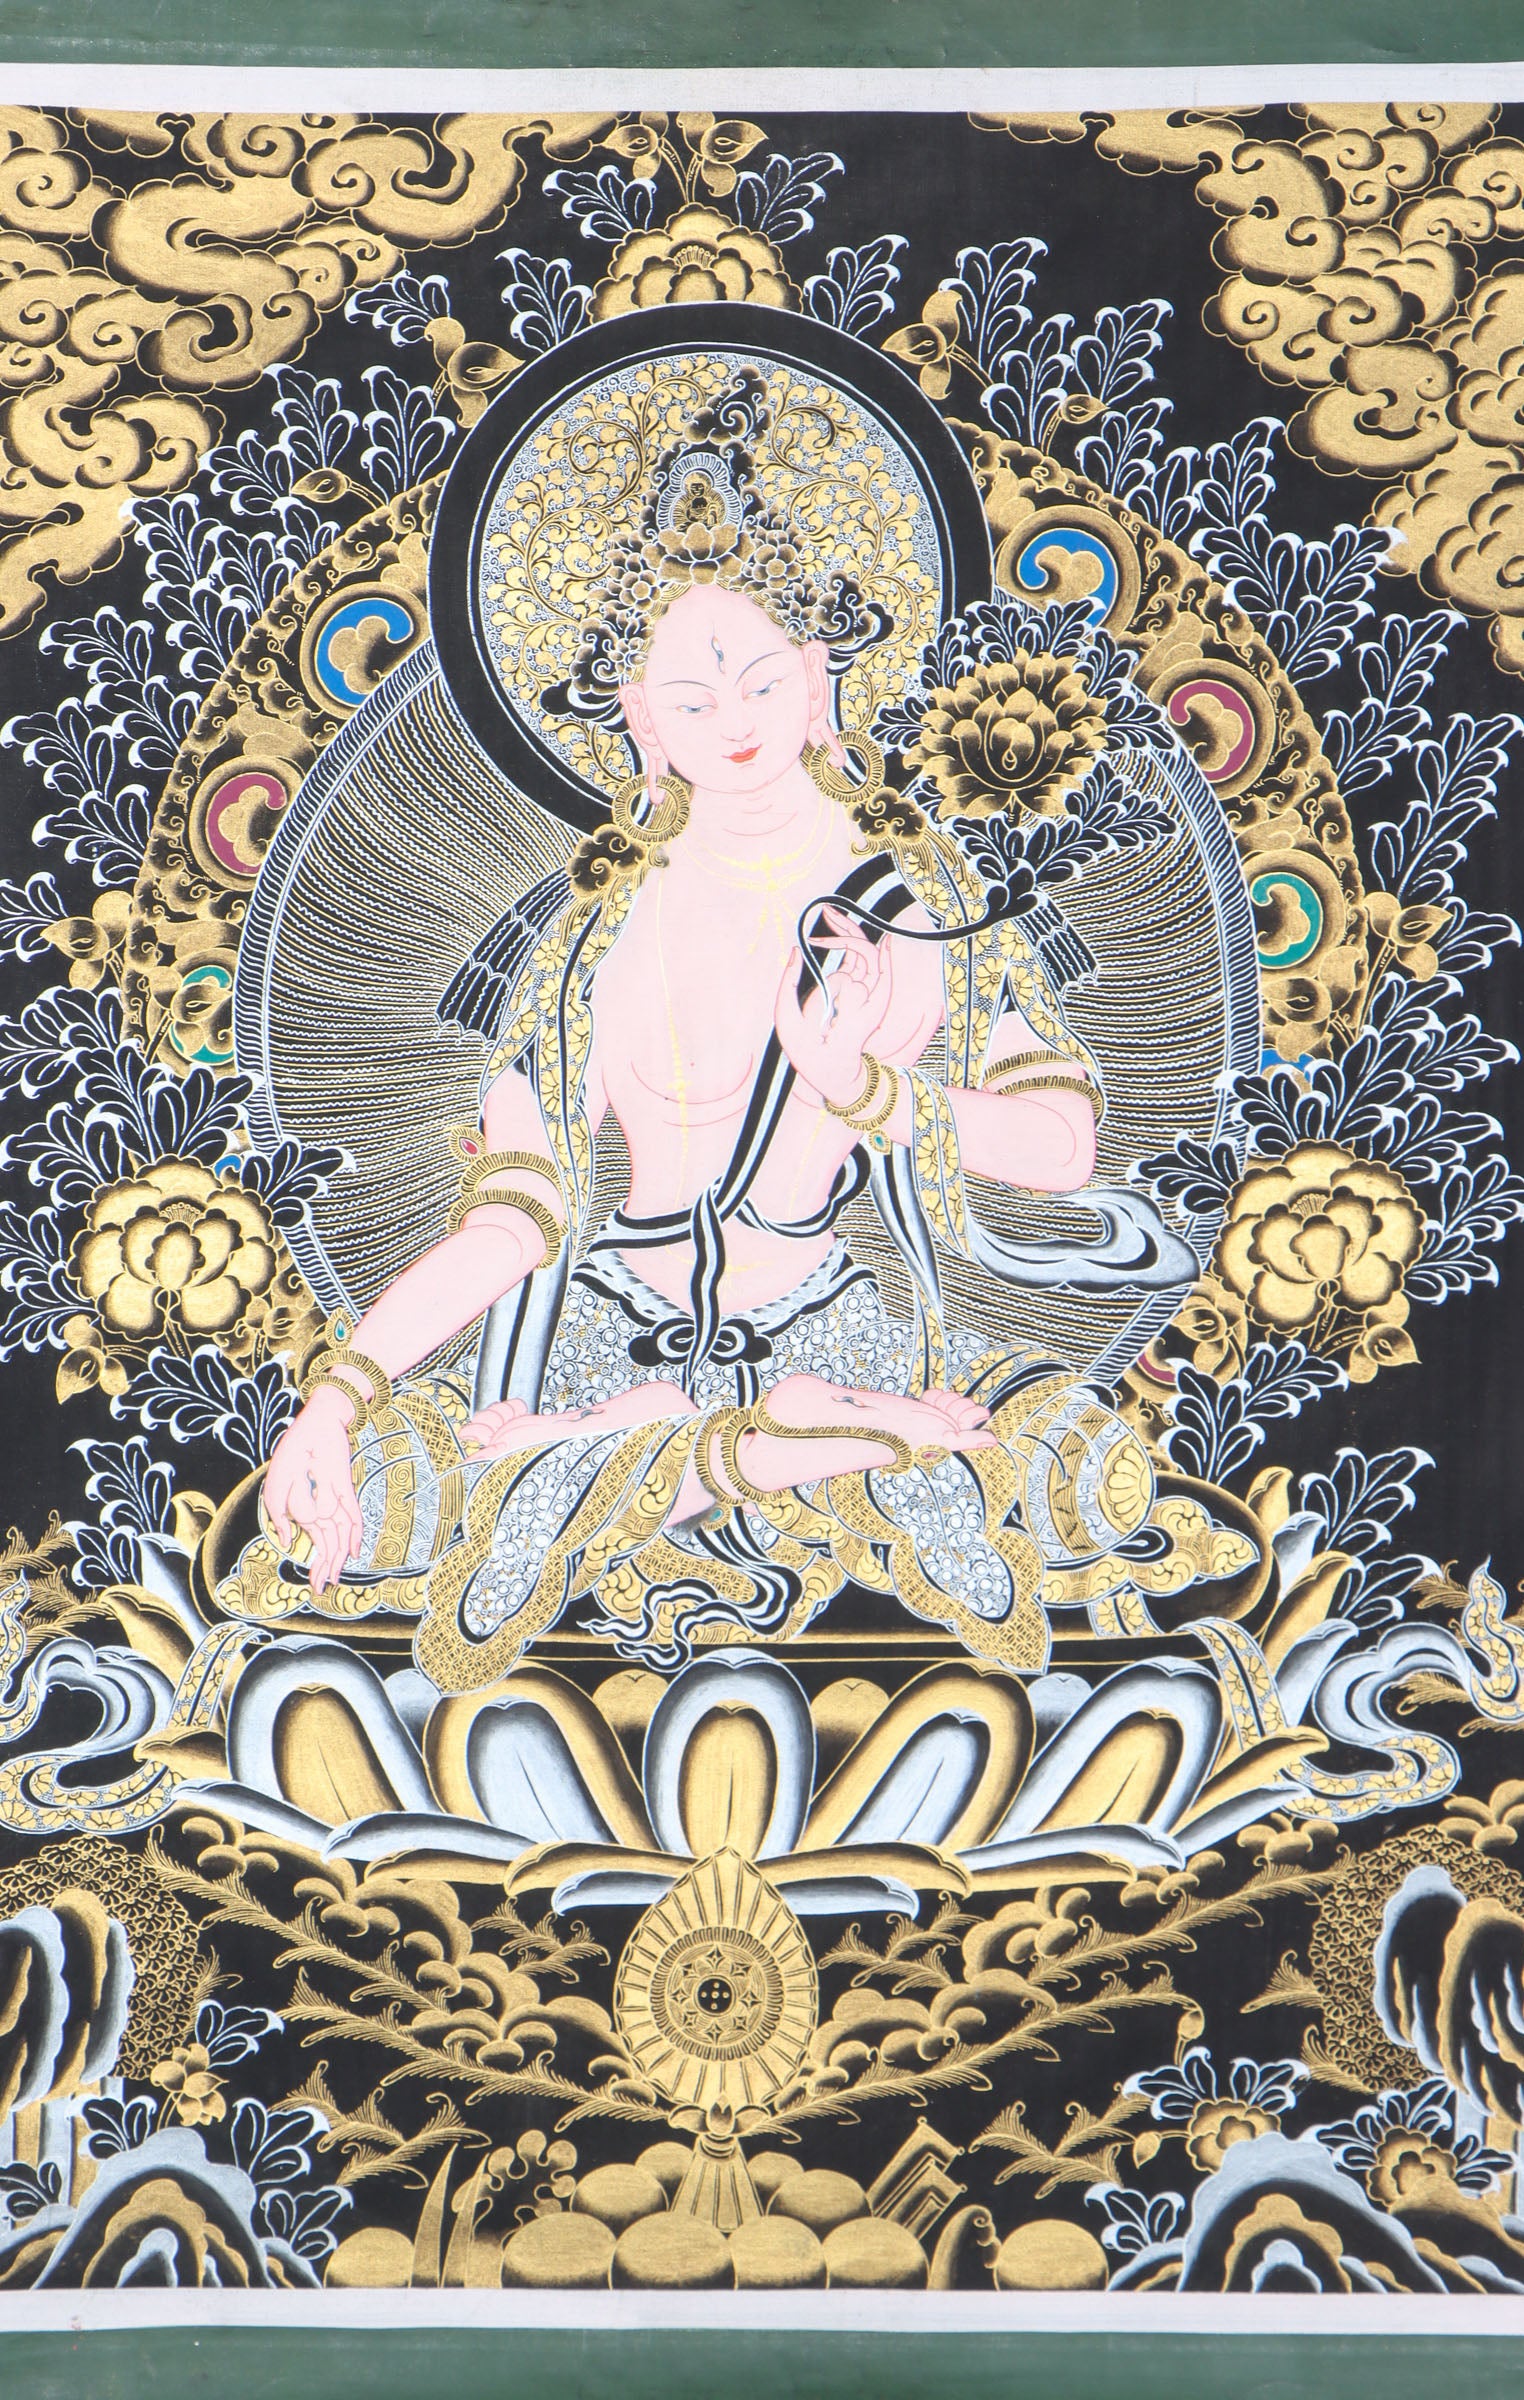 White tara Thangka on Black and gold color theme for wall hanging and spiritual practices